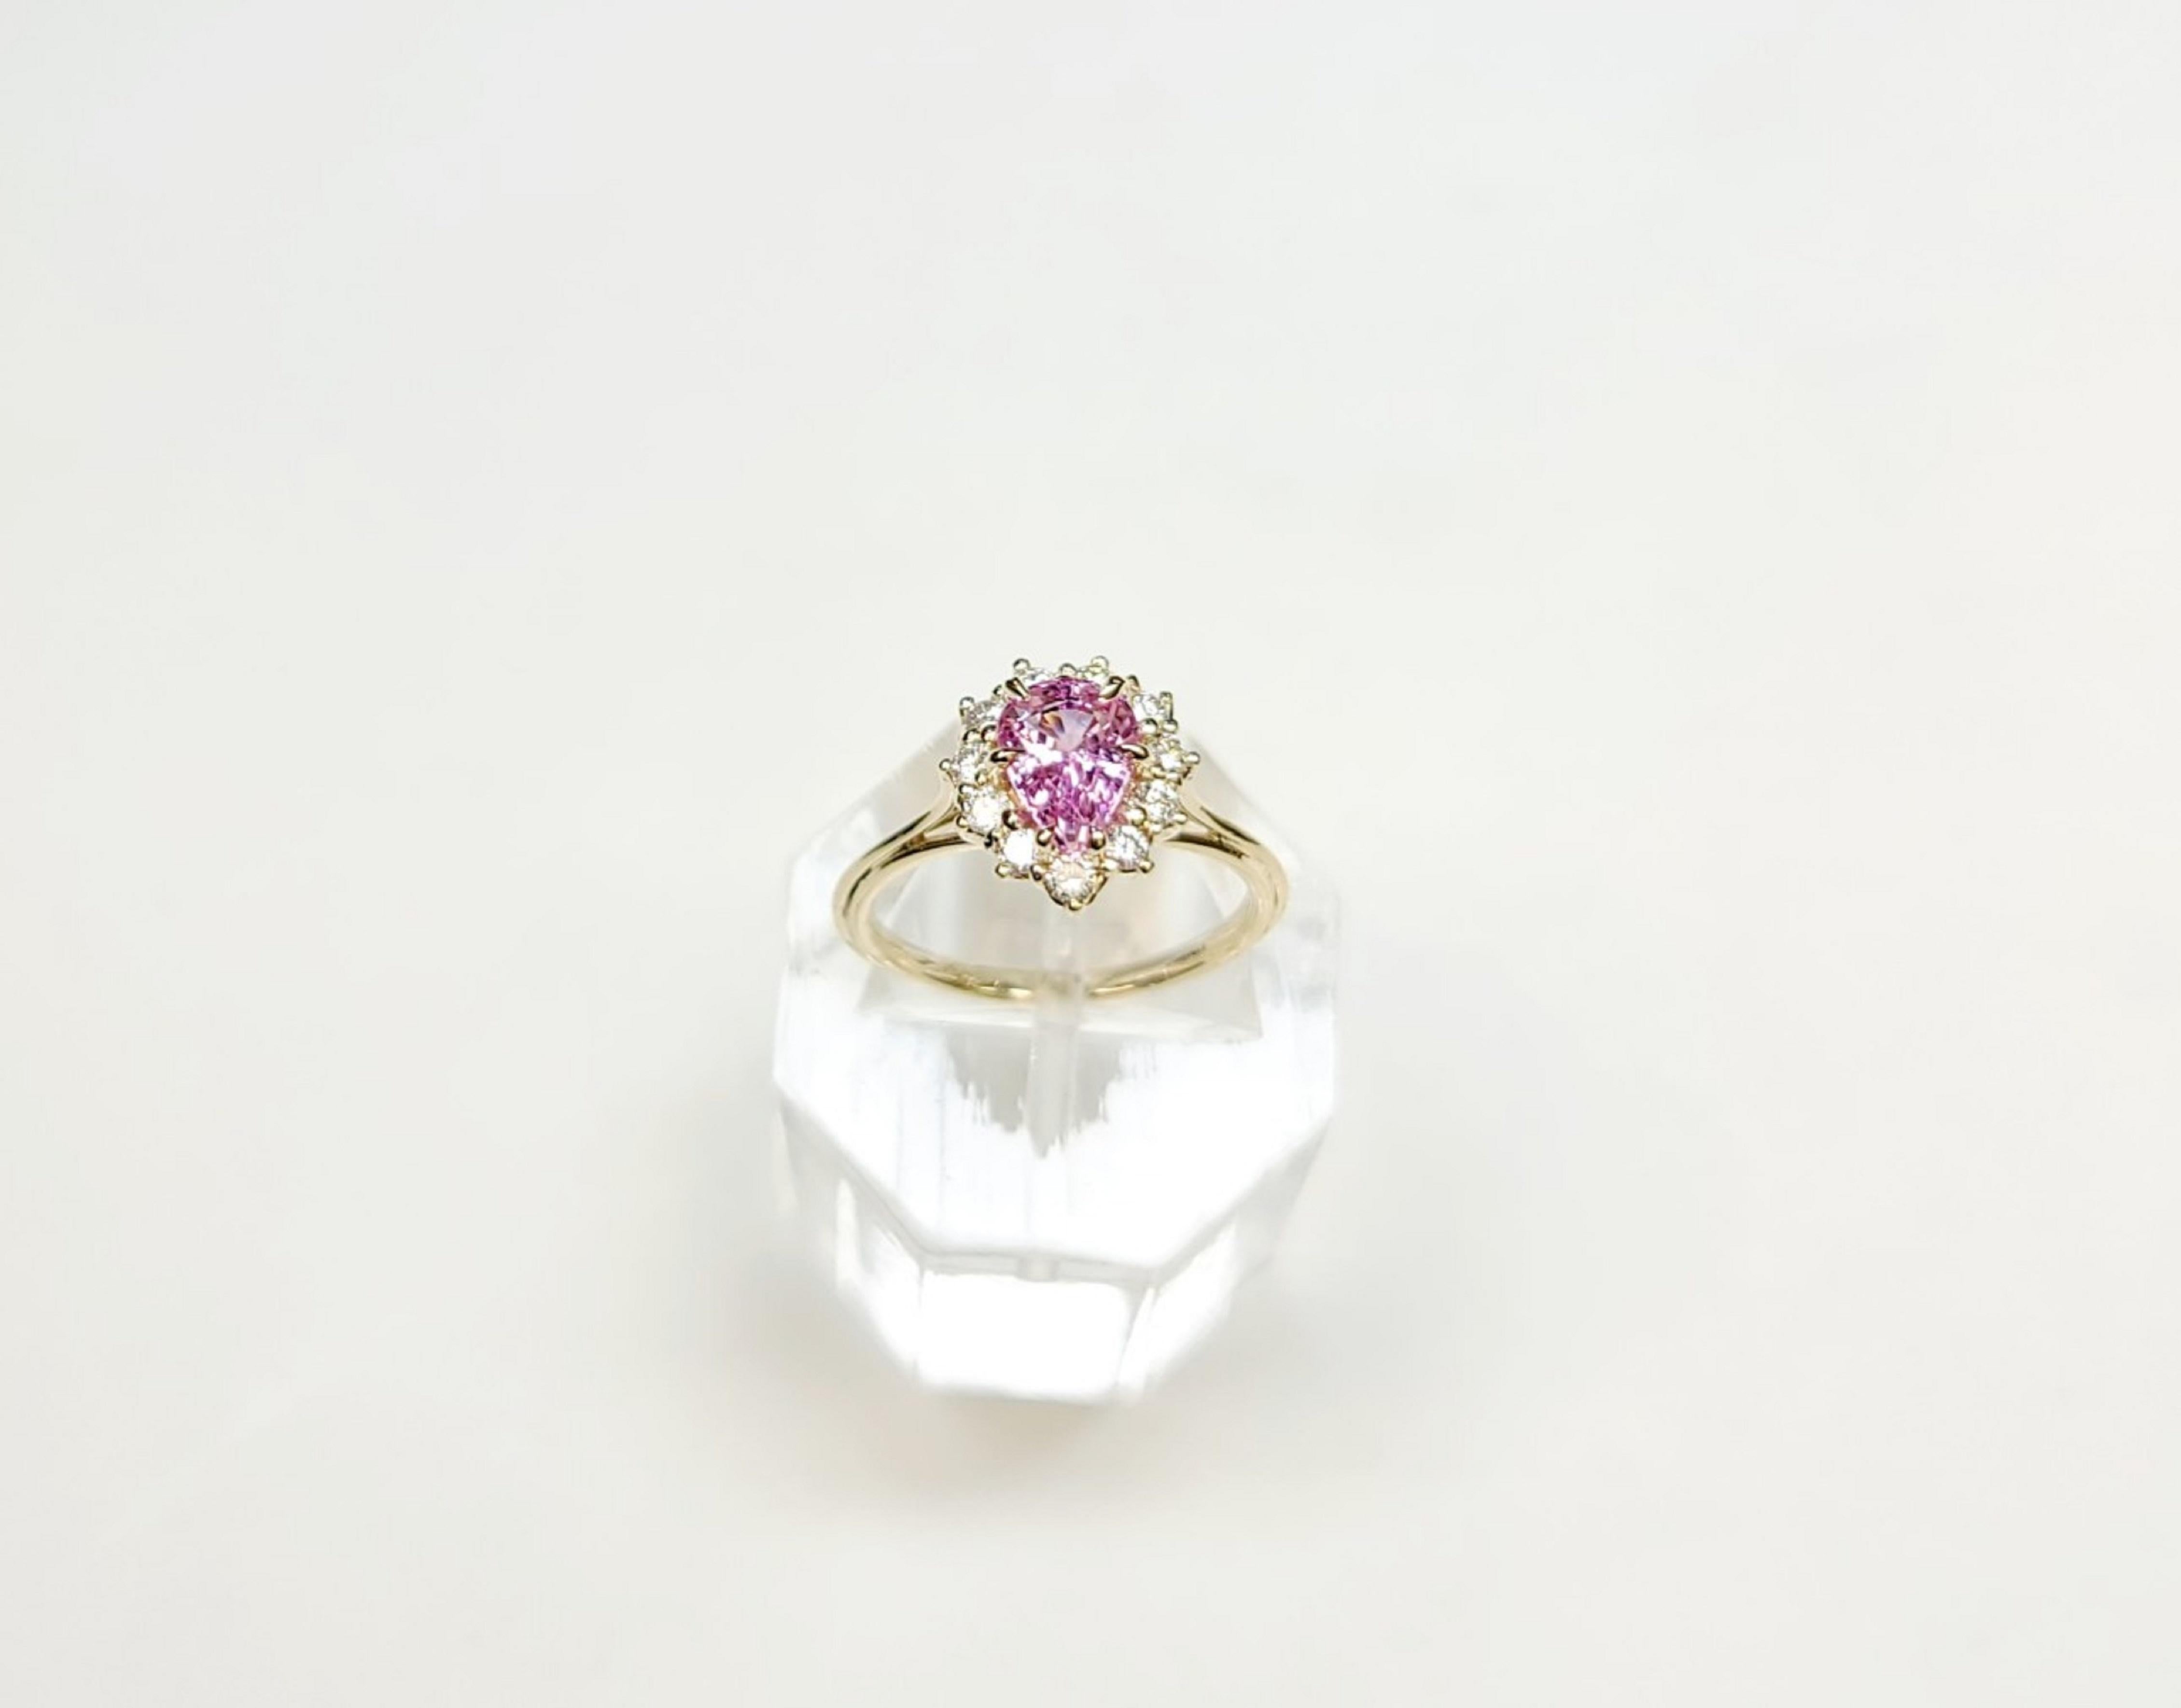 New Cert 1.37 ct Unheated Natural Pink Sapphire Diamond Ring in 14k Gold For Sale 12